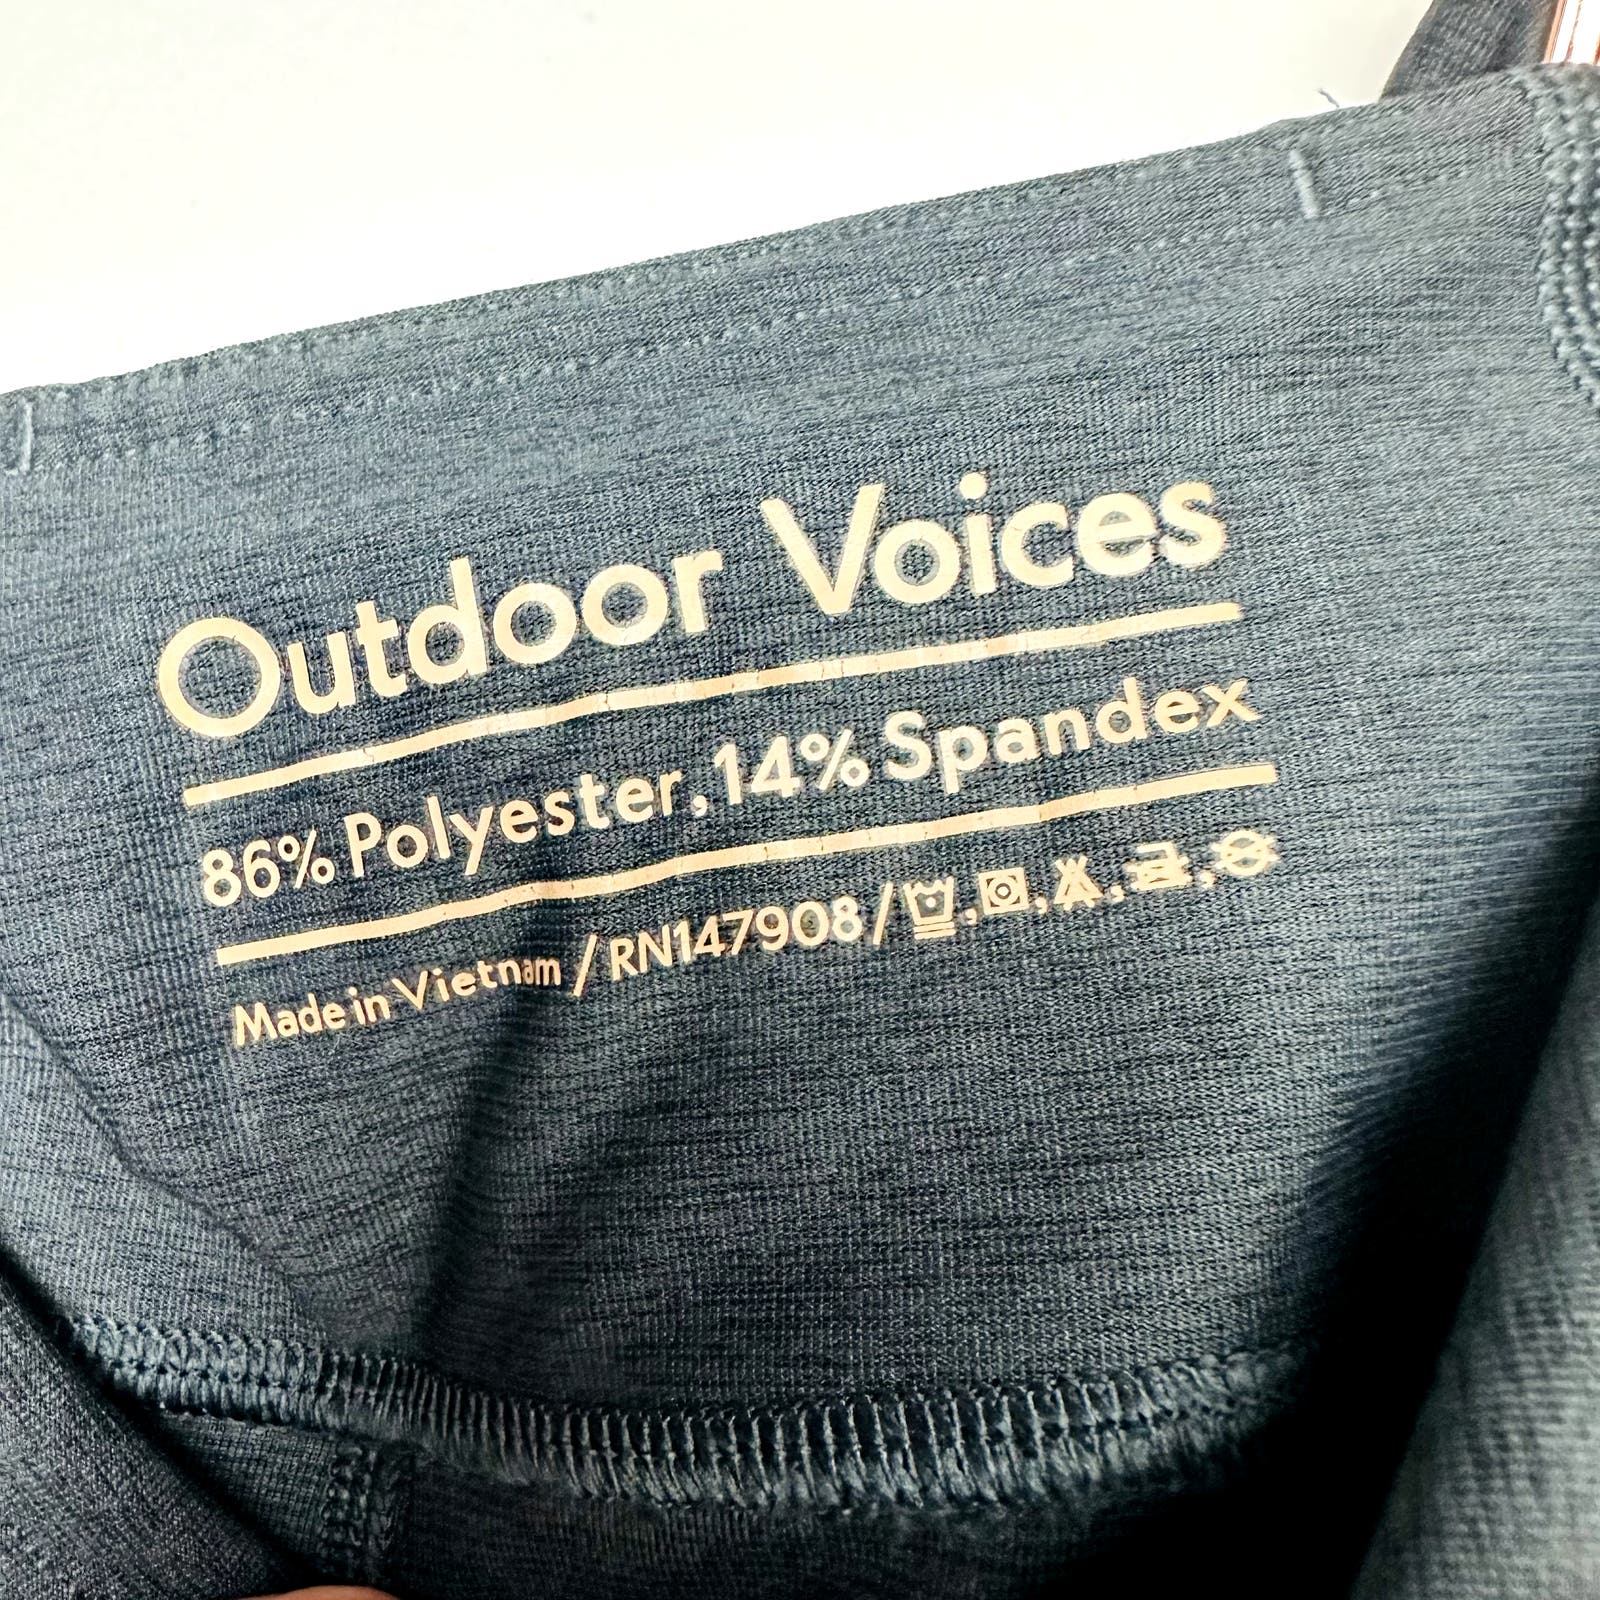 Outdoor Voices NWT Charcoal High Waist Double Time Shorts Size XS